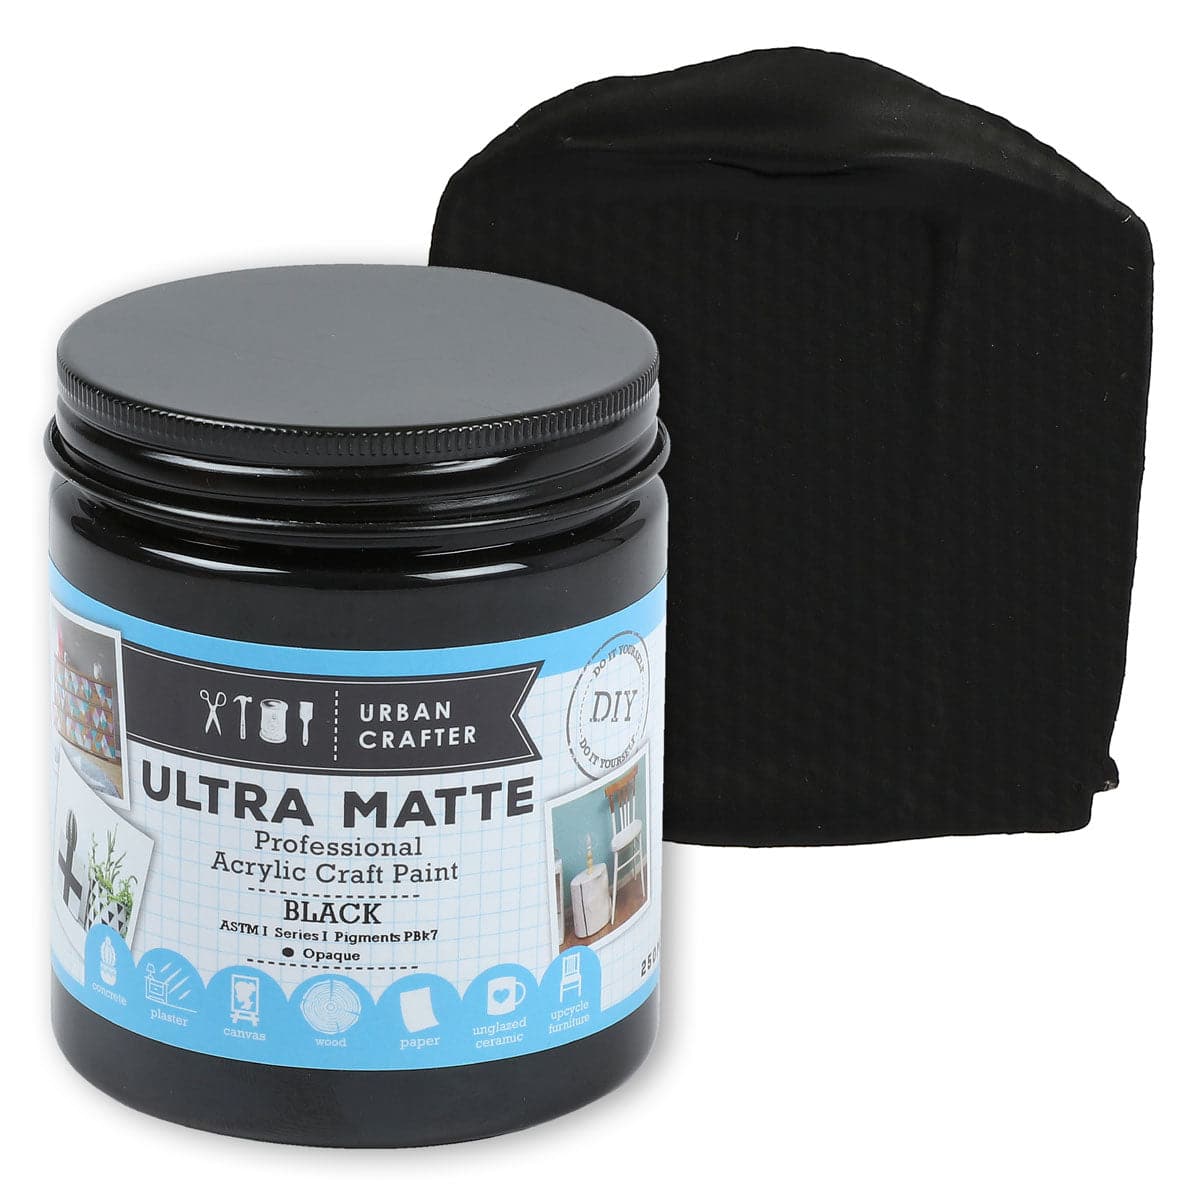 Image of Urban Crafter Ultra Matte Acrylic Paint Opaque S1 ASTM1 Black 250ml